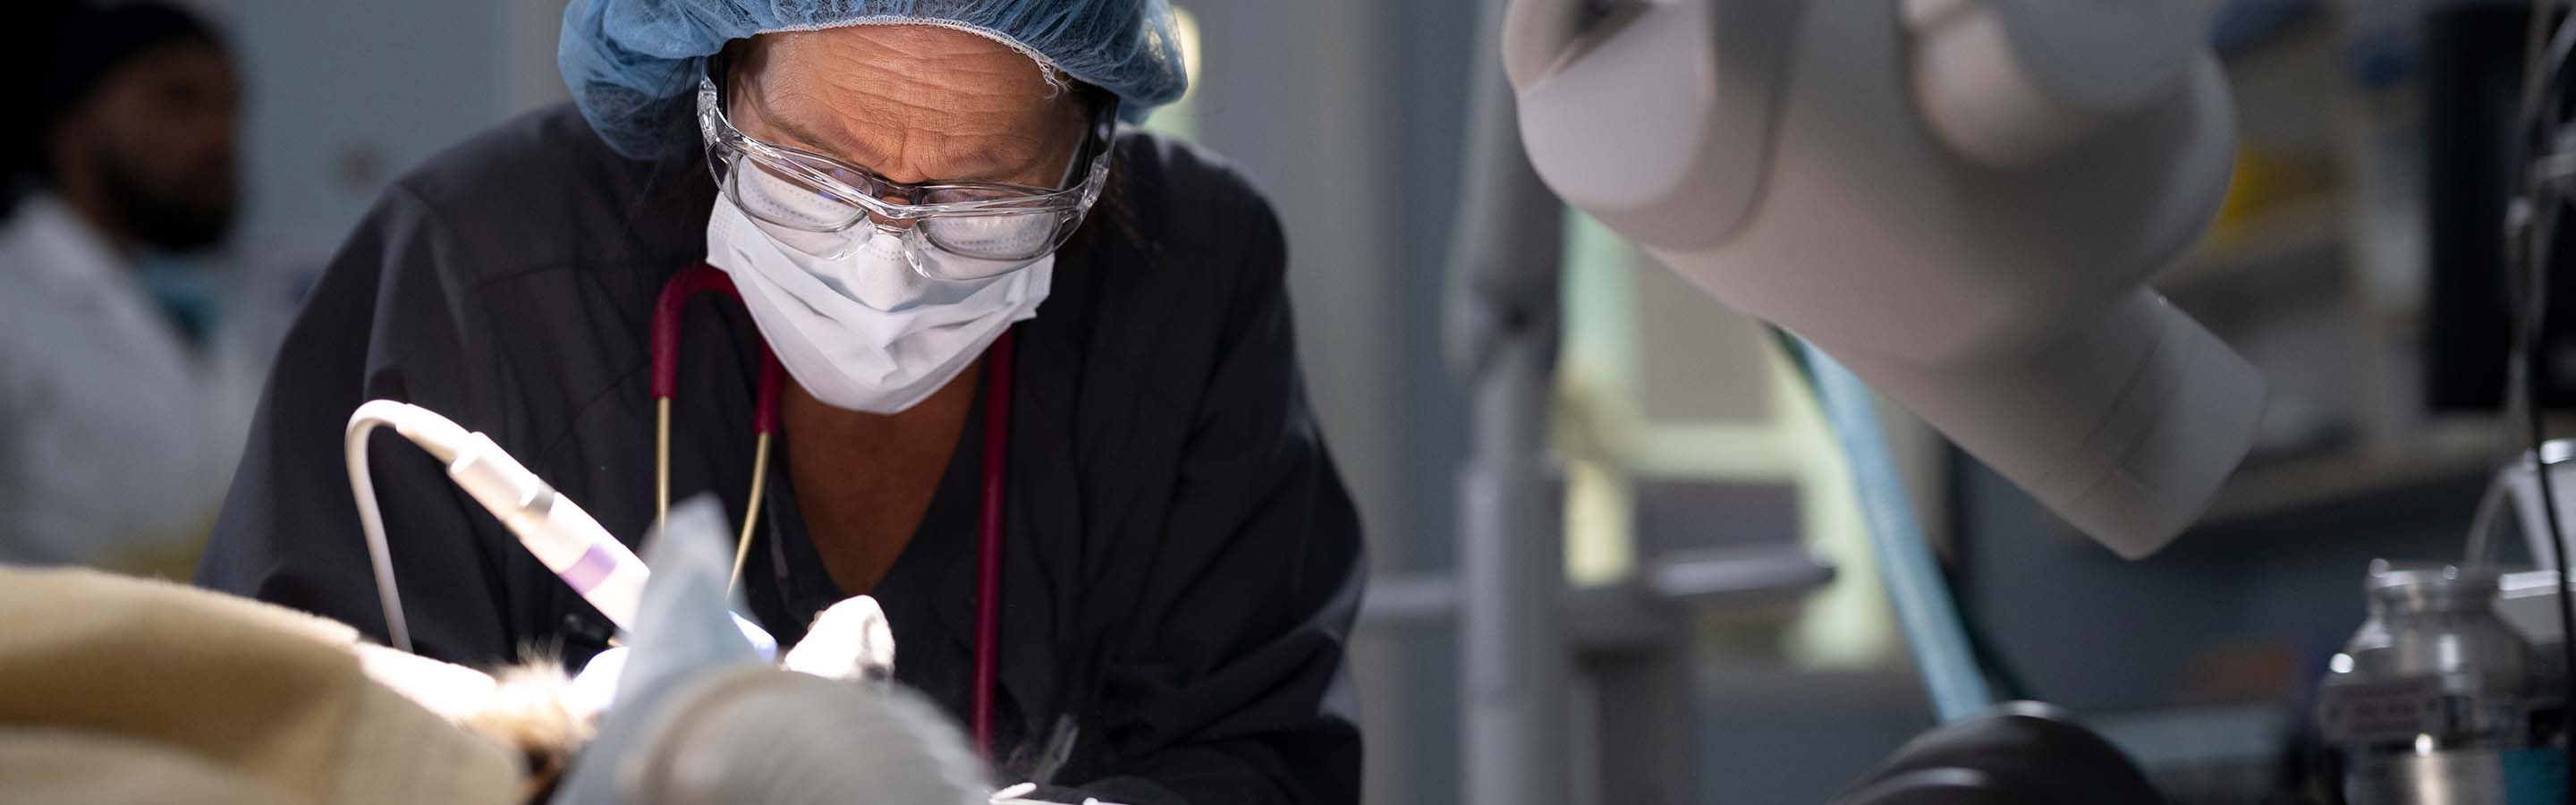 A woman veterinarian performs a procedure on an animal under anesthesia